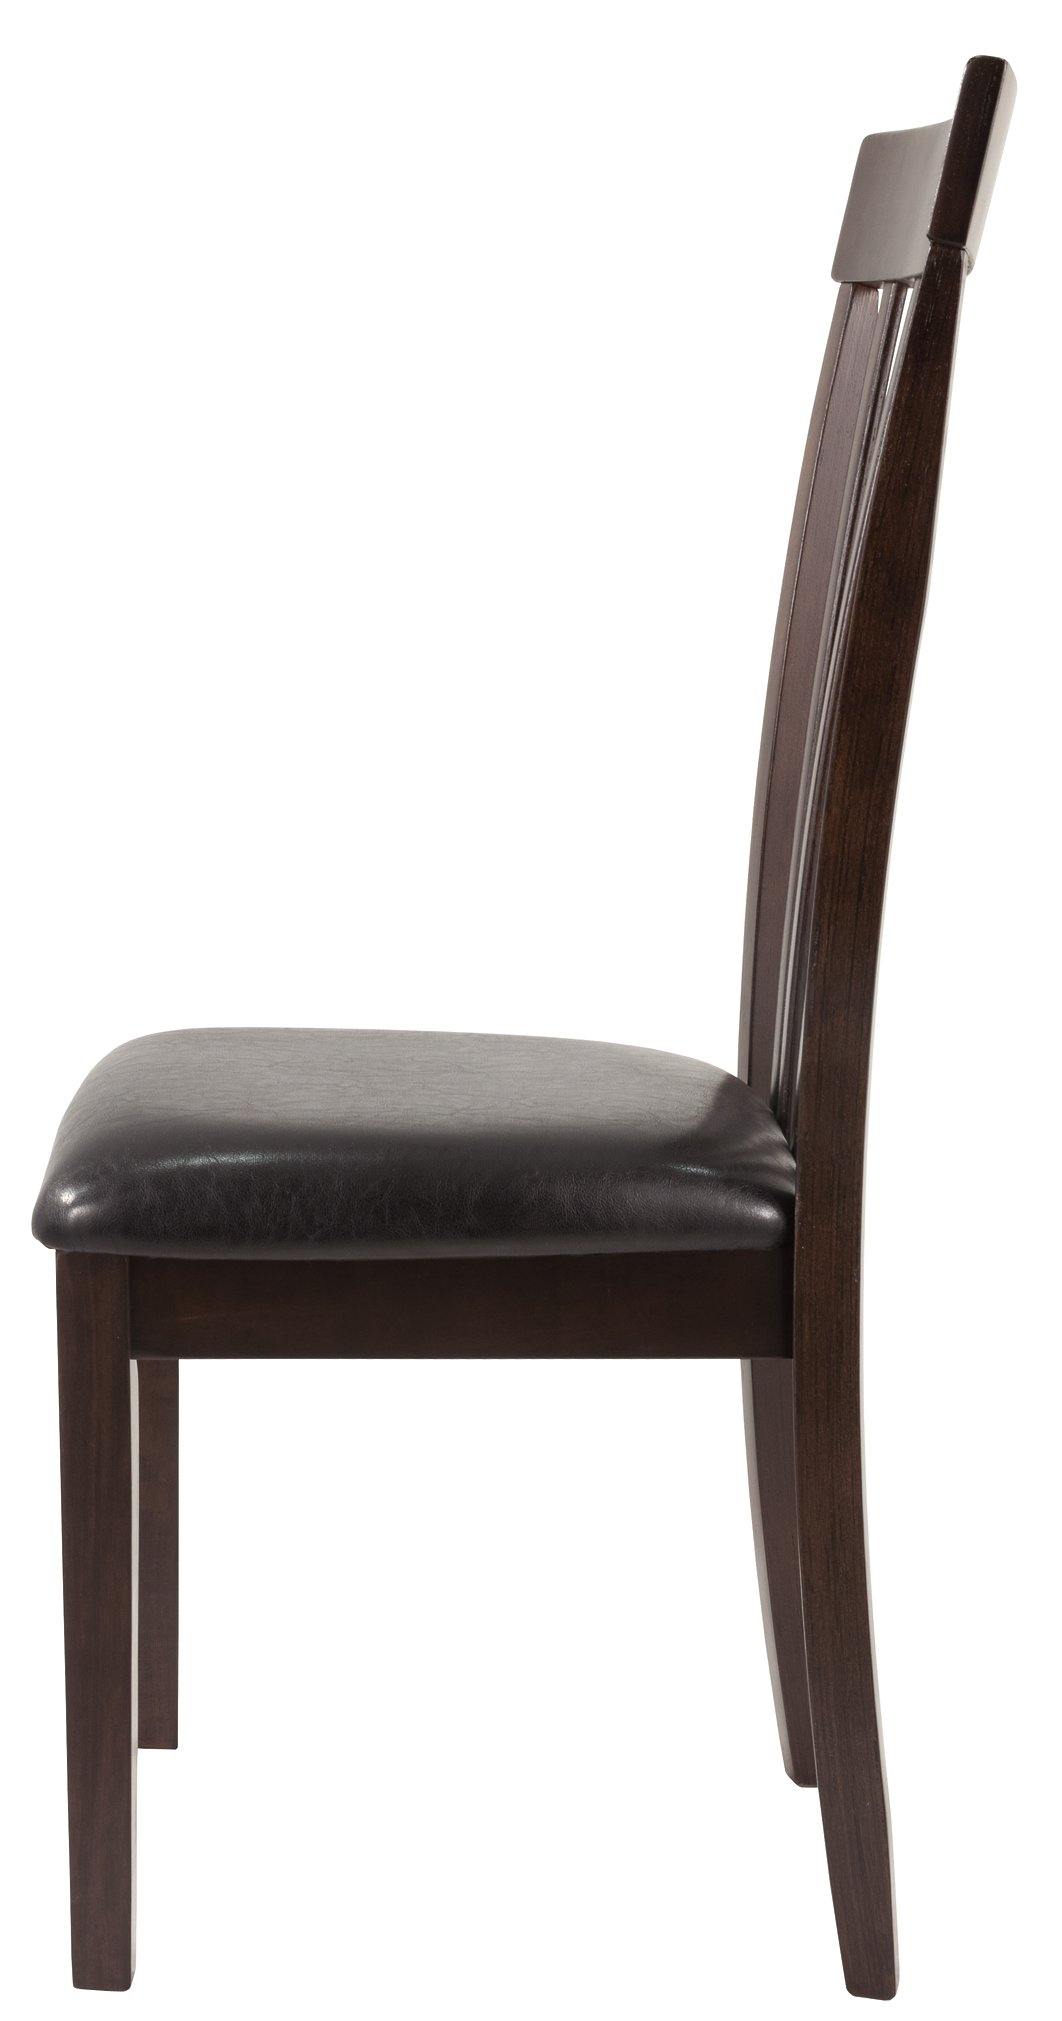 Hammis Dining Chair D310-01 Dark Brown Contemporary casual seating By ashley - sofafair.com